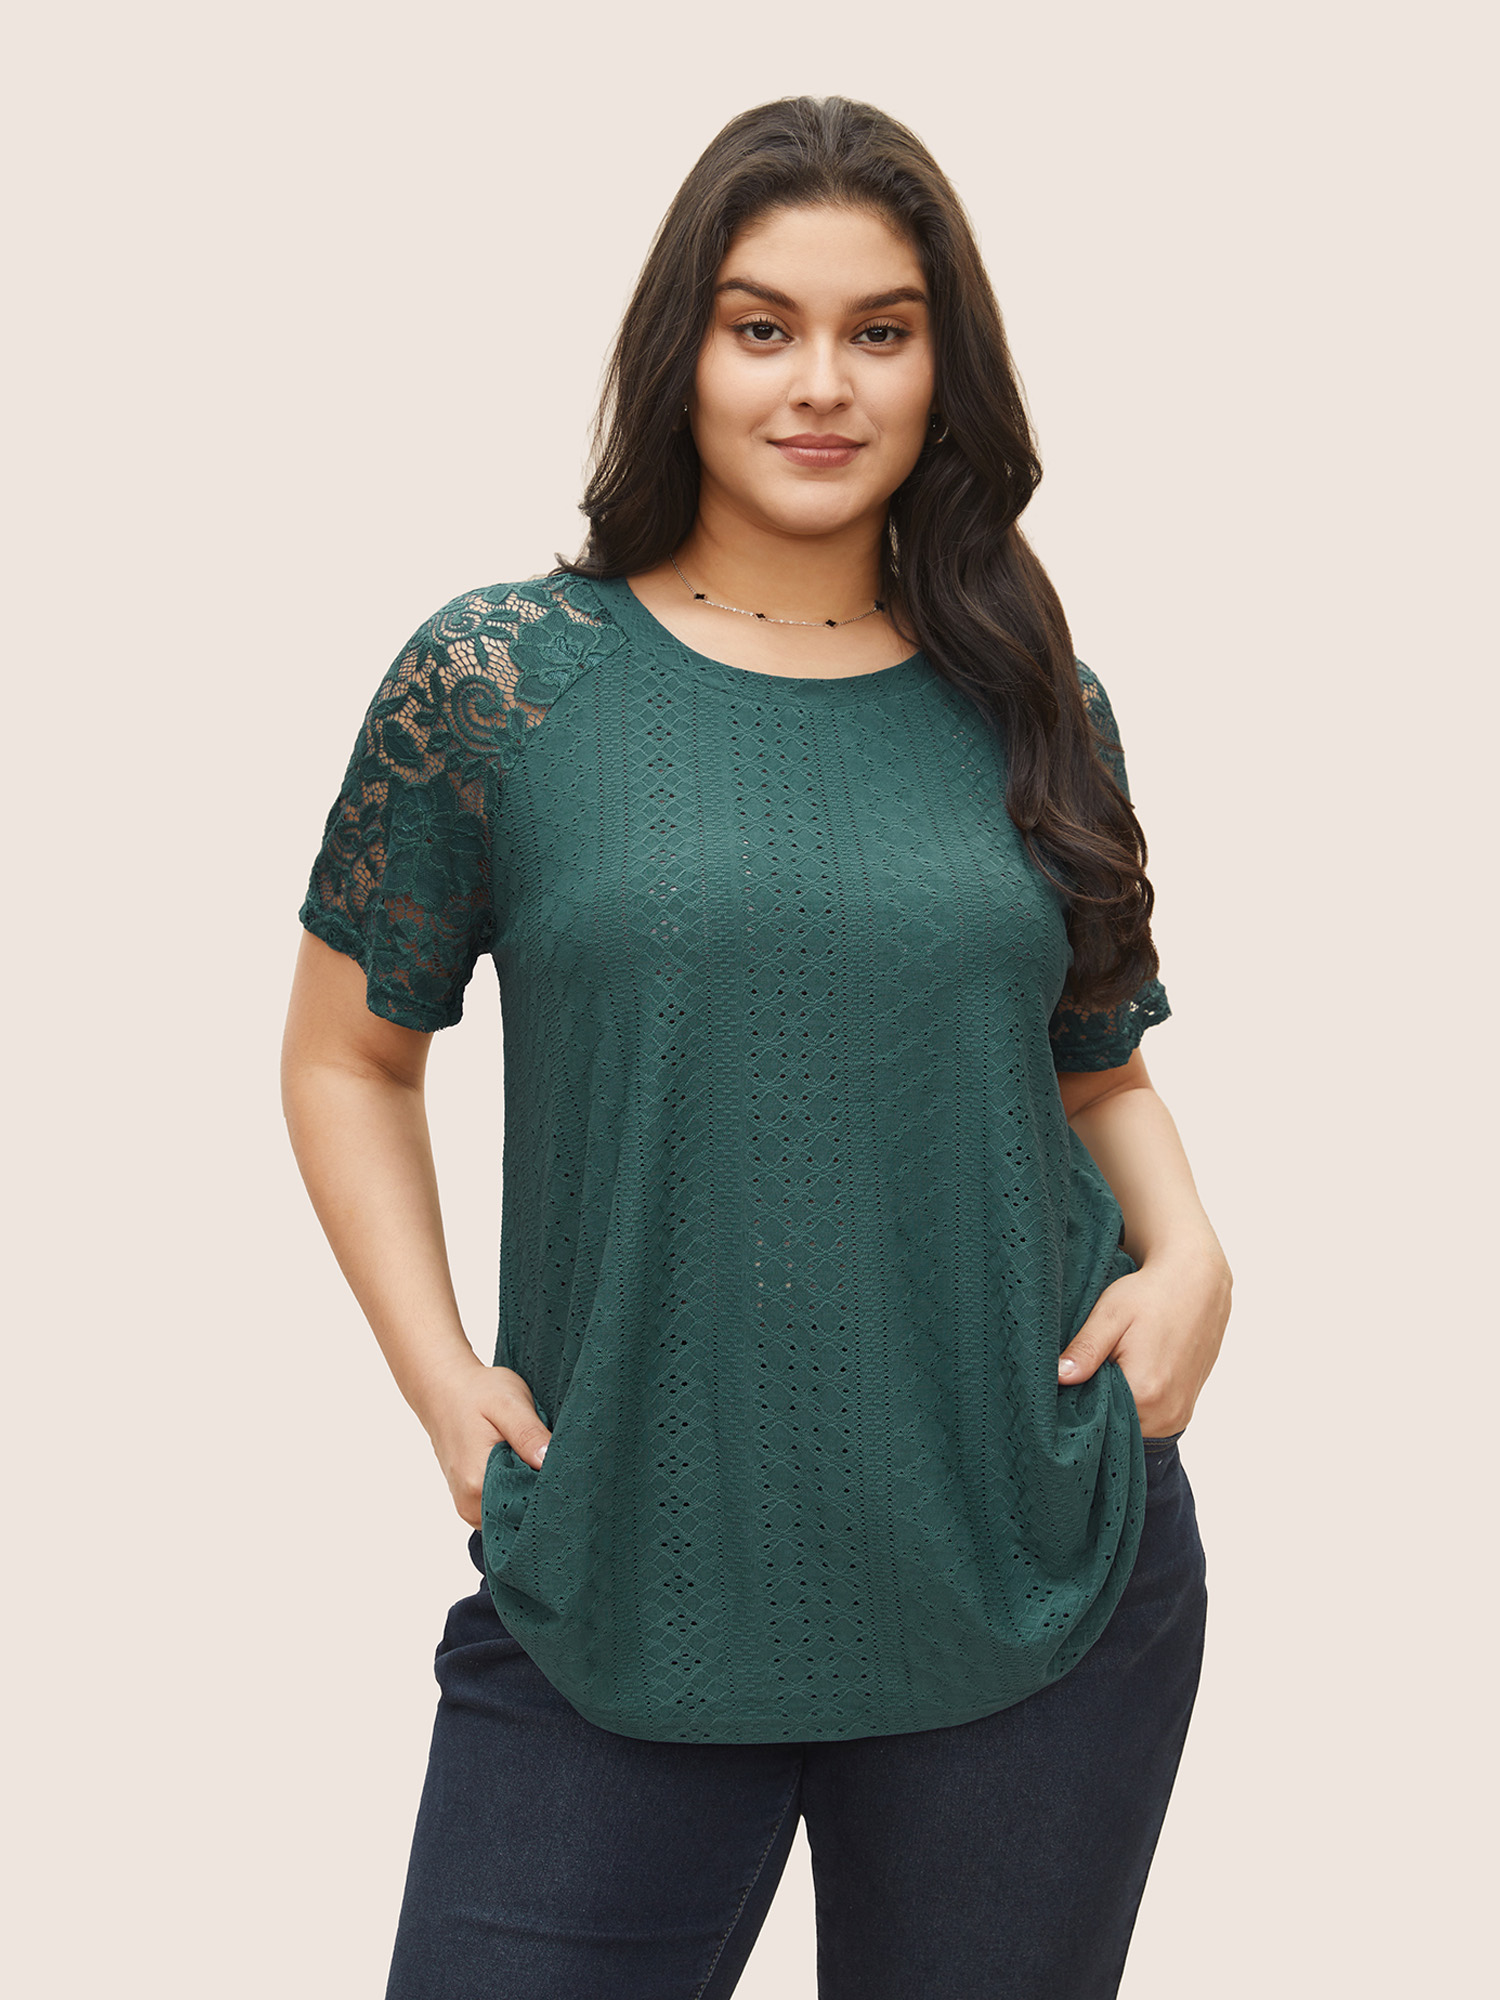 

Plus Size Solid Broderie Anglaise Lace Raglan Sleeve T-shirt Cyan Women Elegant See through Plain Round Neck Everyday T-shirts BloomChic